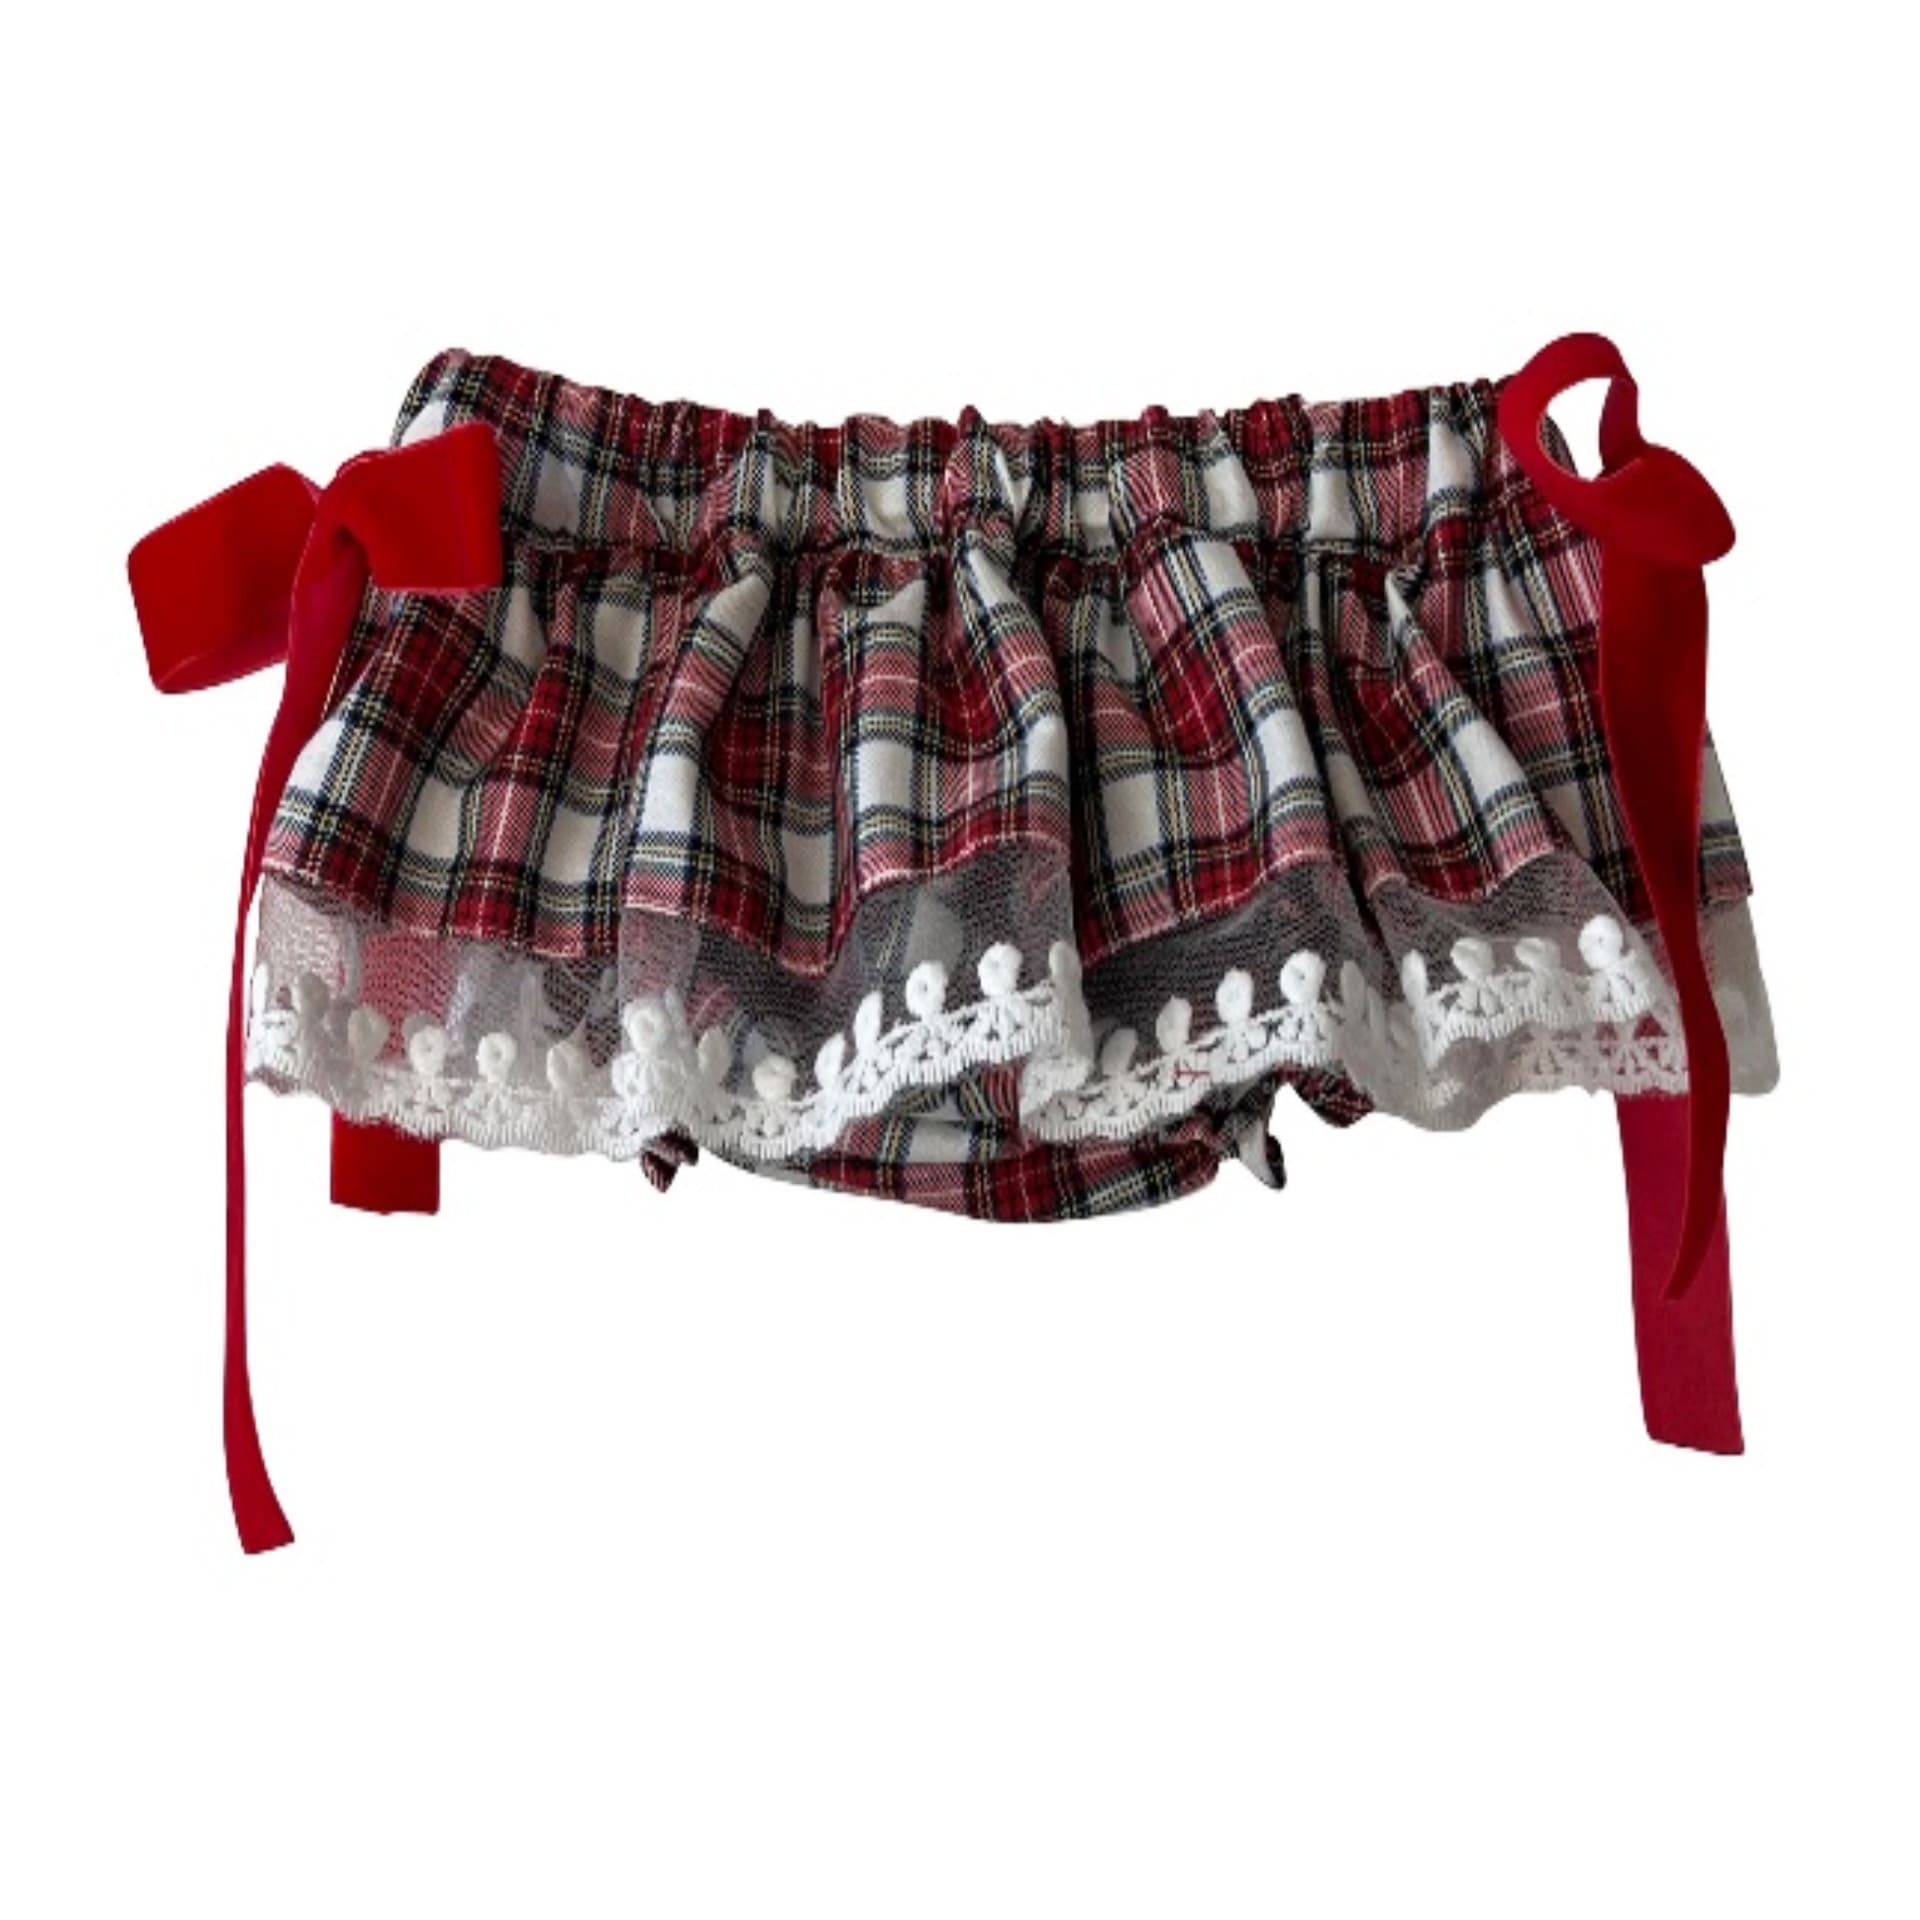 Ivory and red tartan bloomer with lace